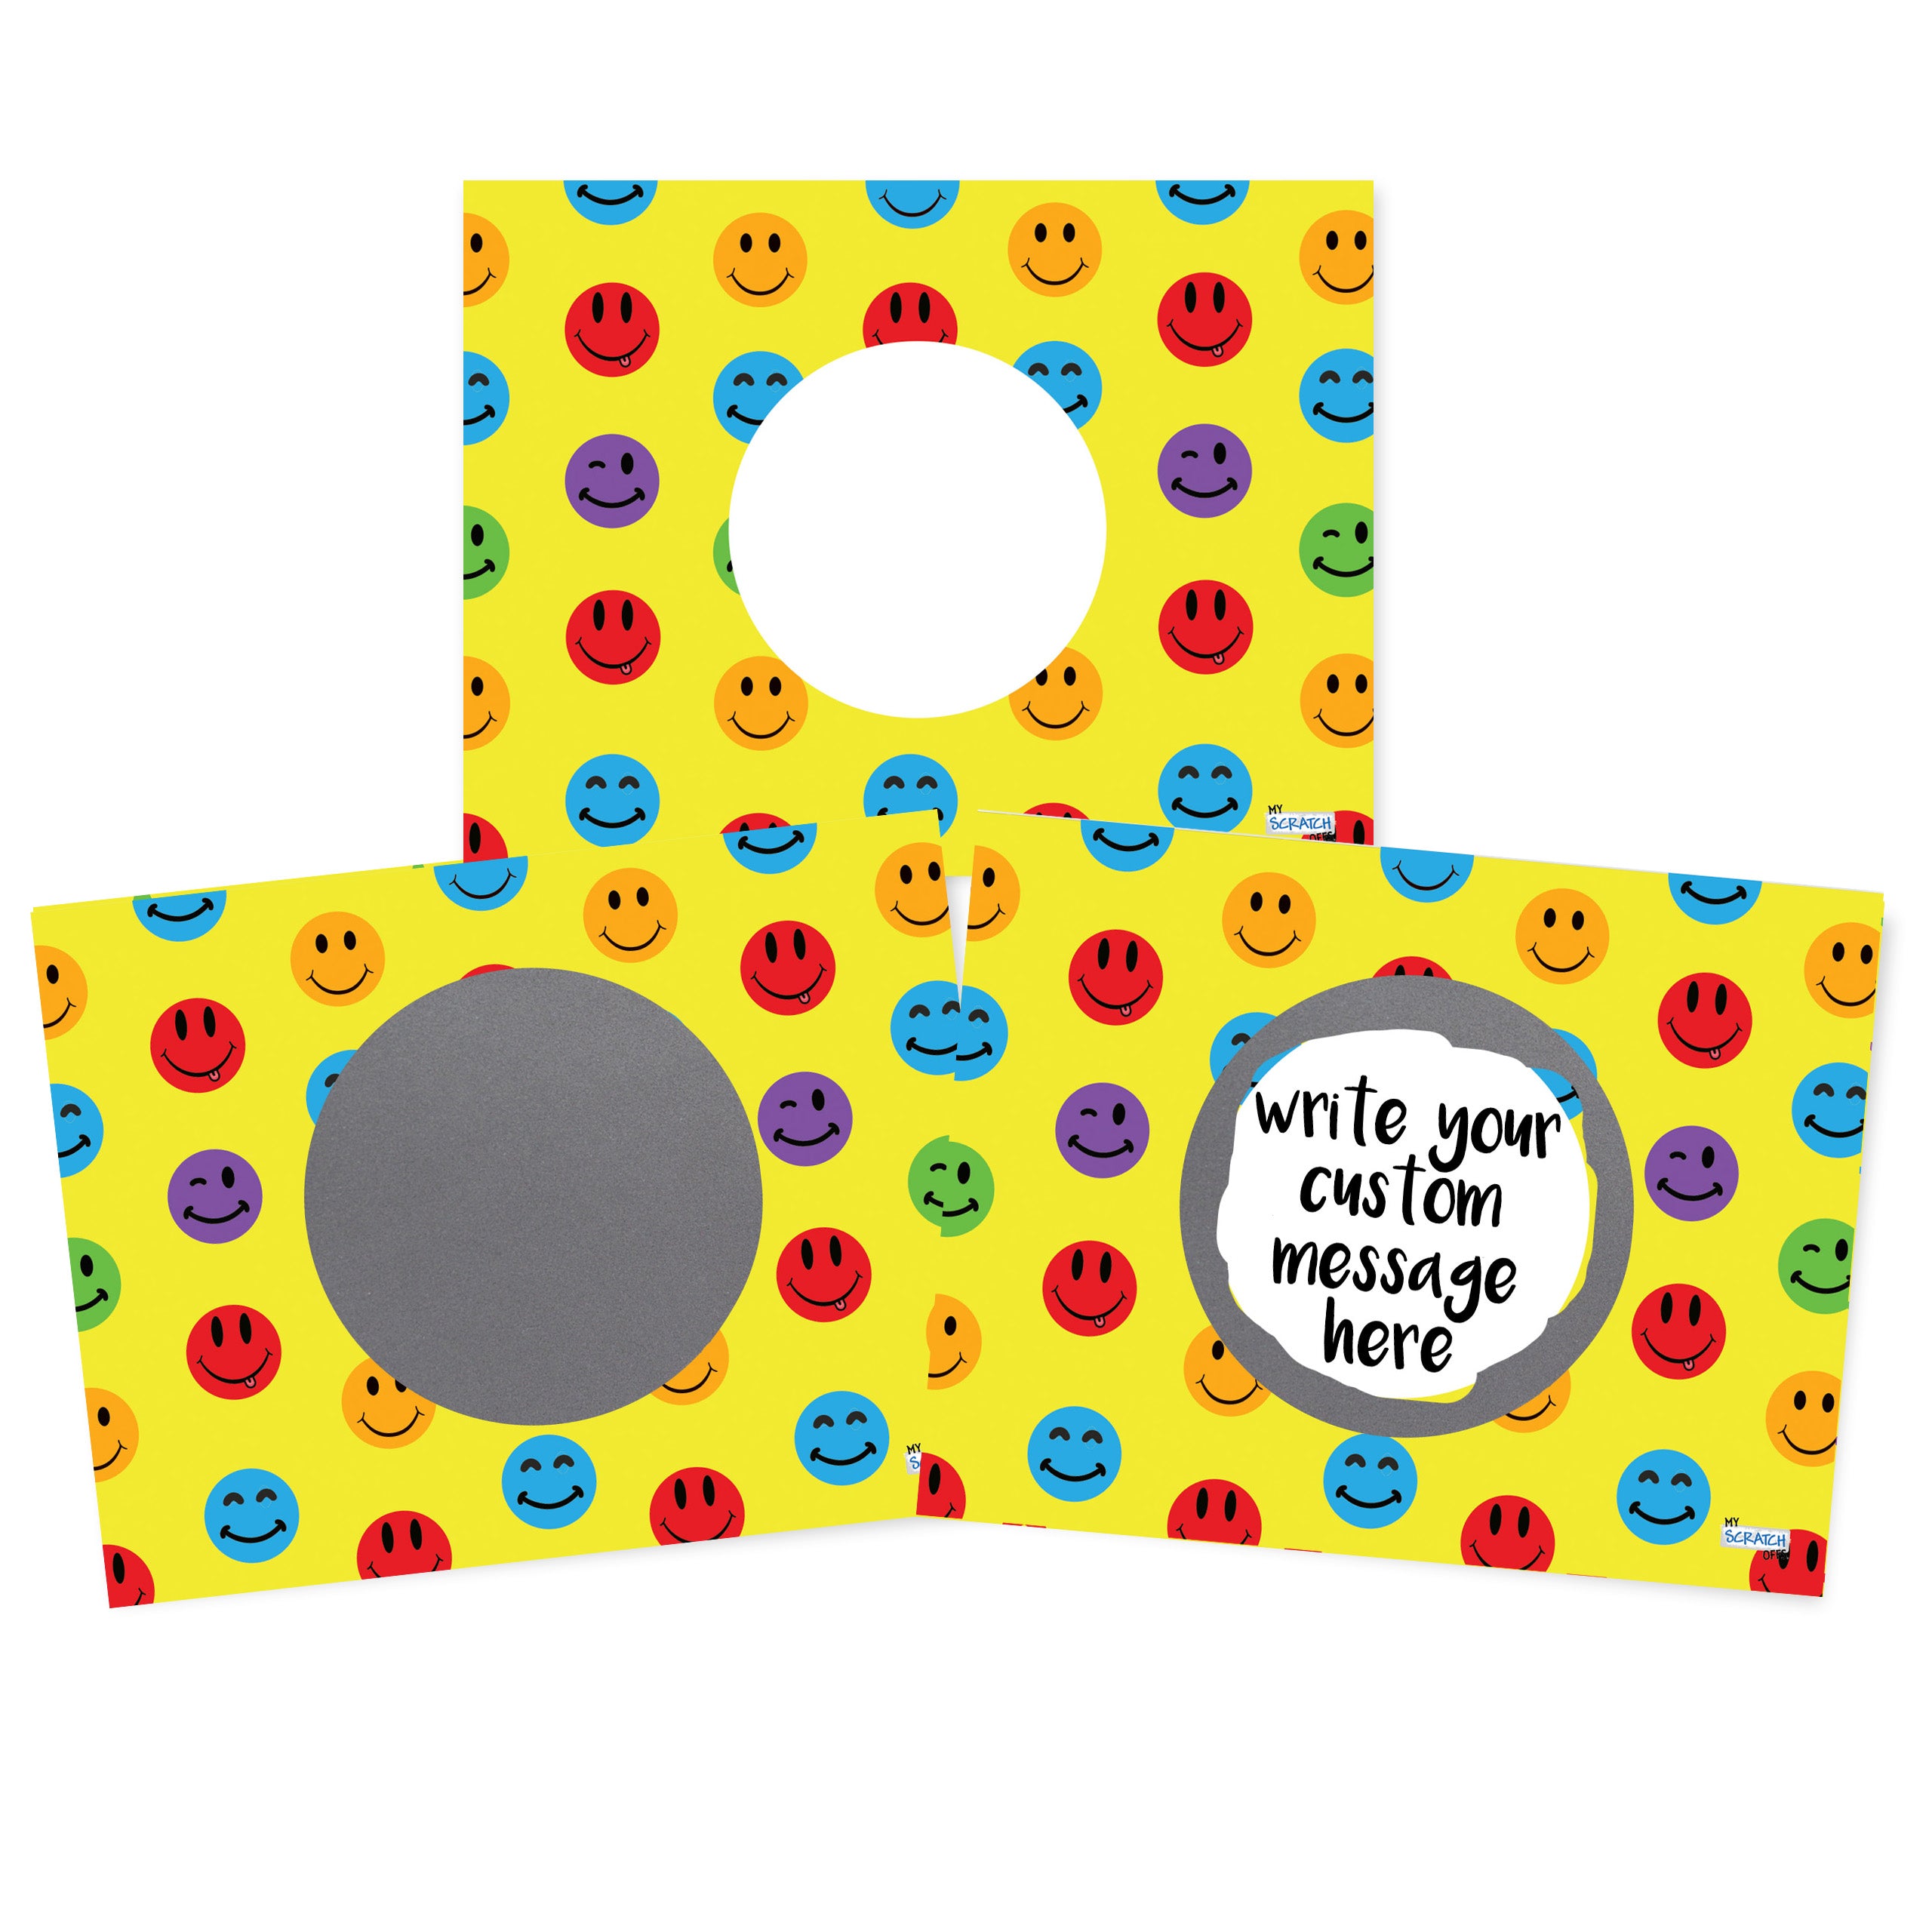 DIY Make Your Own Scratch Off Note Card Smiley Face 20 Pack - My Scratch Offs